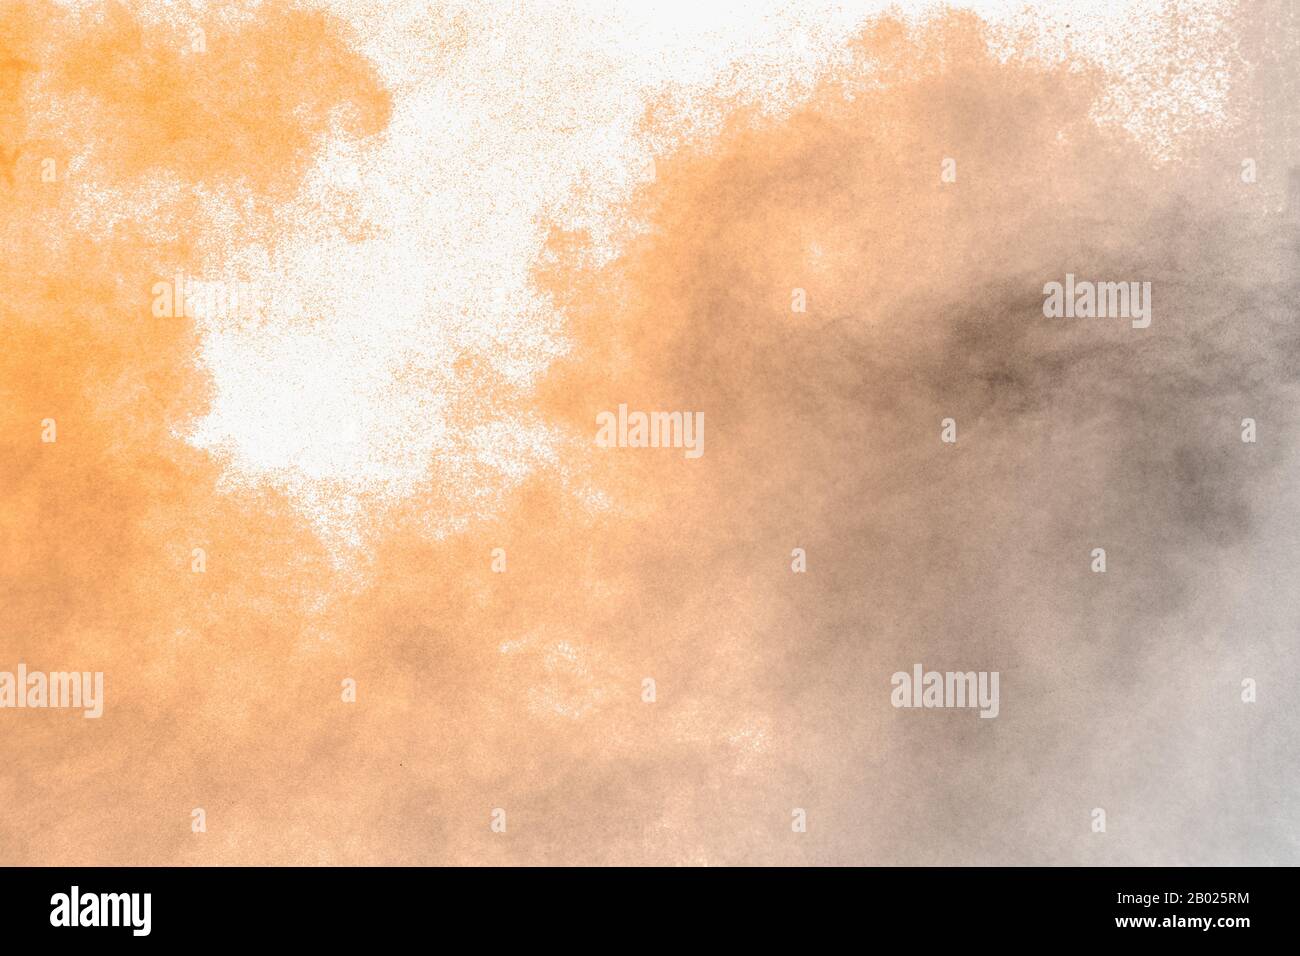 Brown dust explosion cloud.Brown particles splatter on white background. Stock Photo